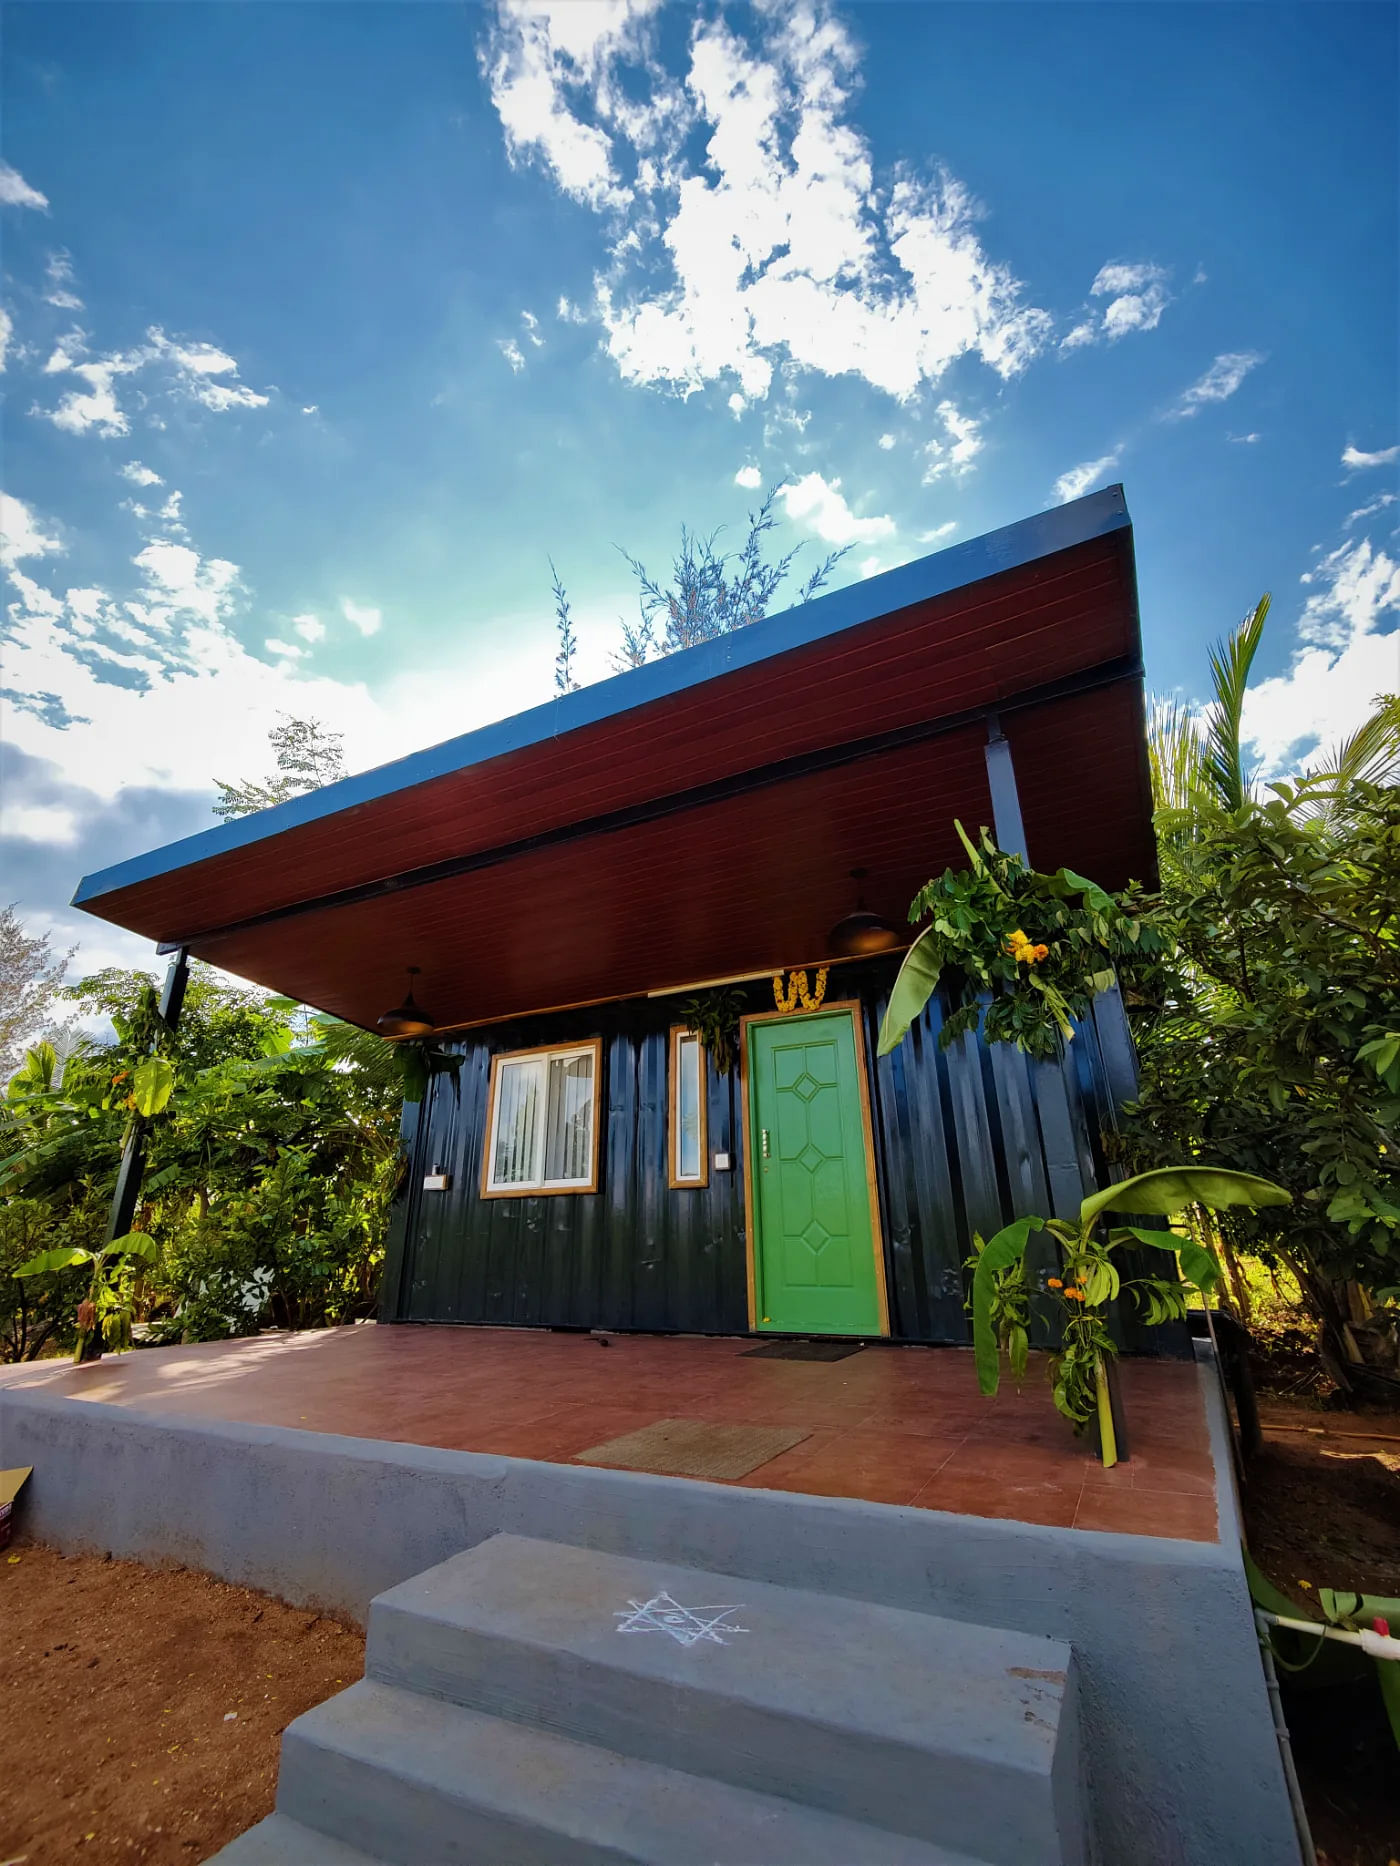 Container homes at a Guava Plantation